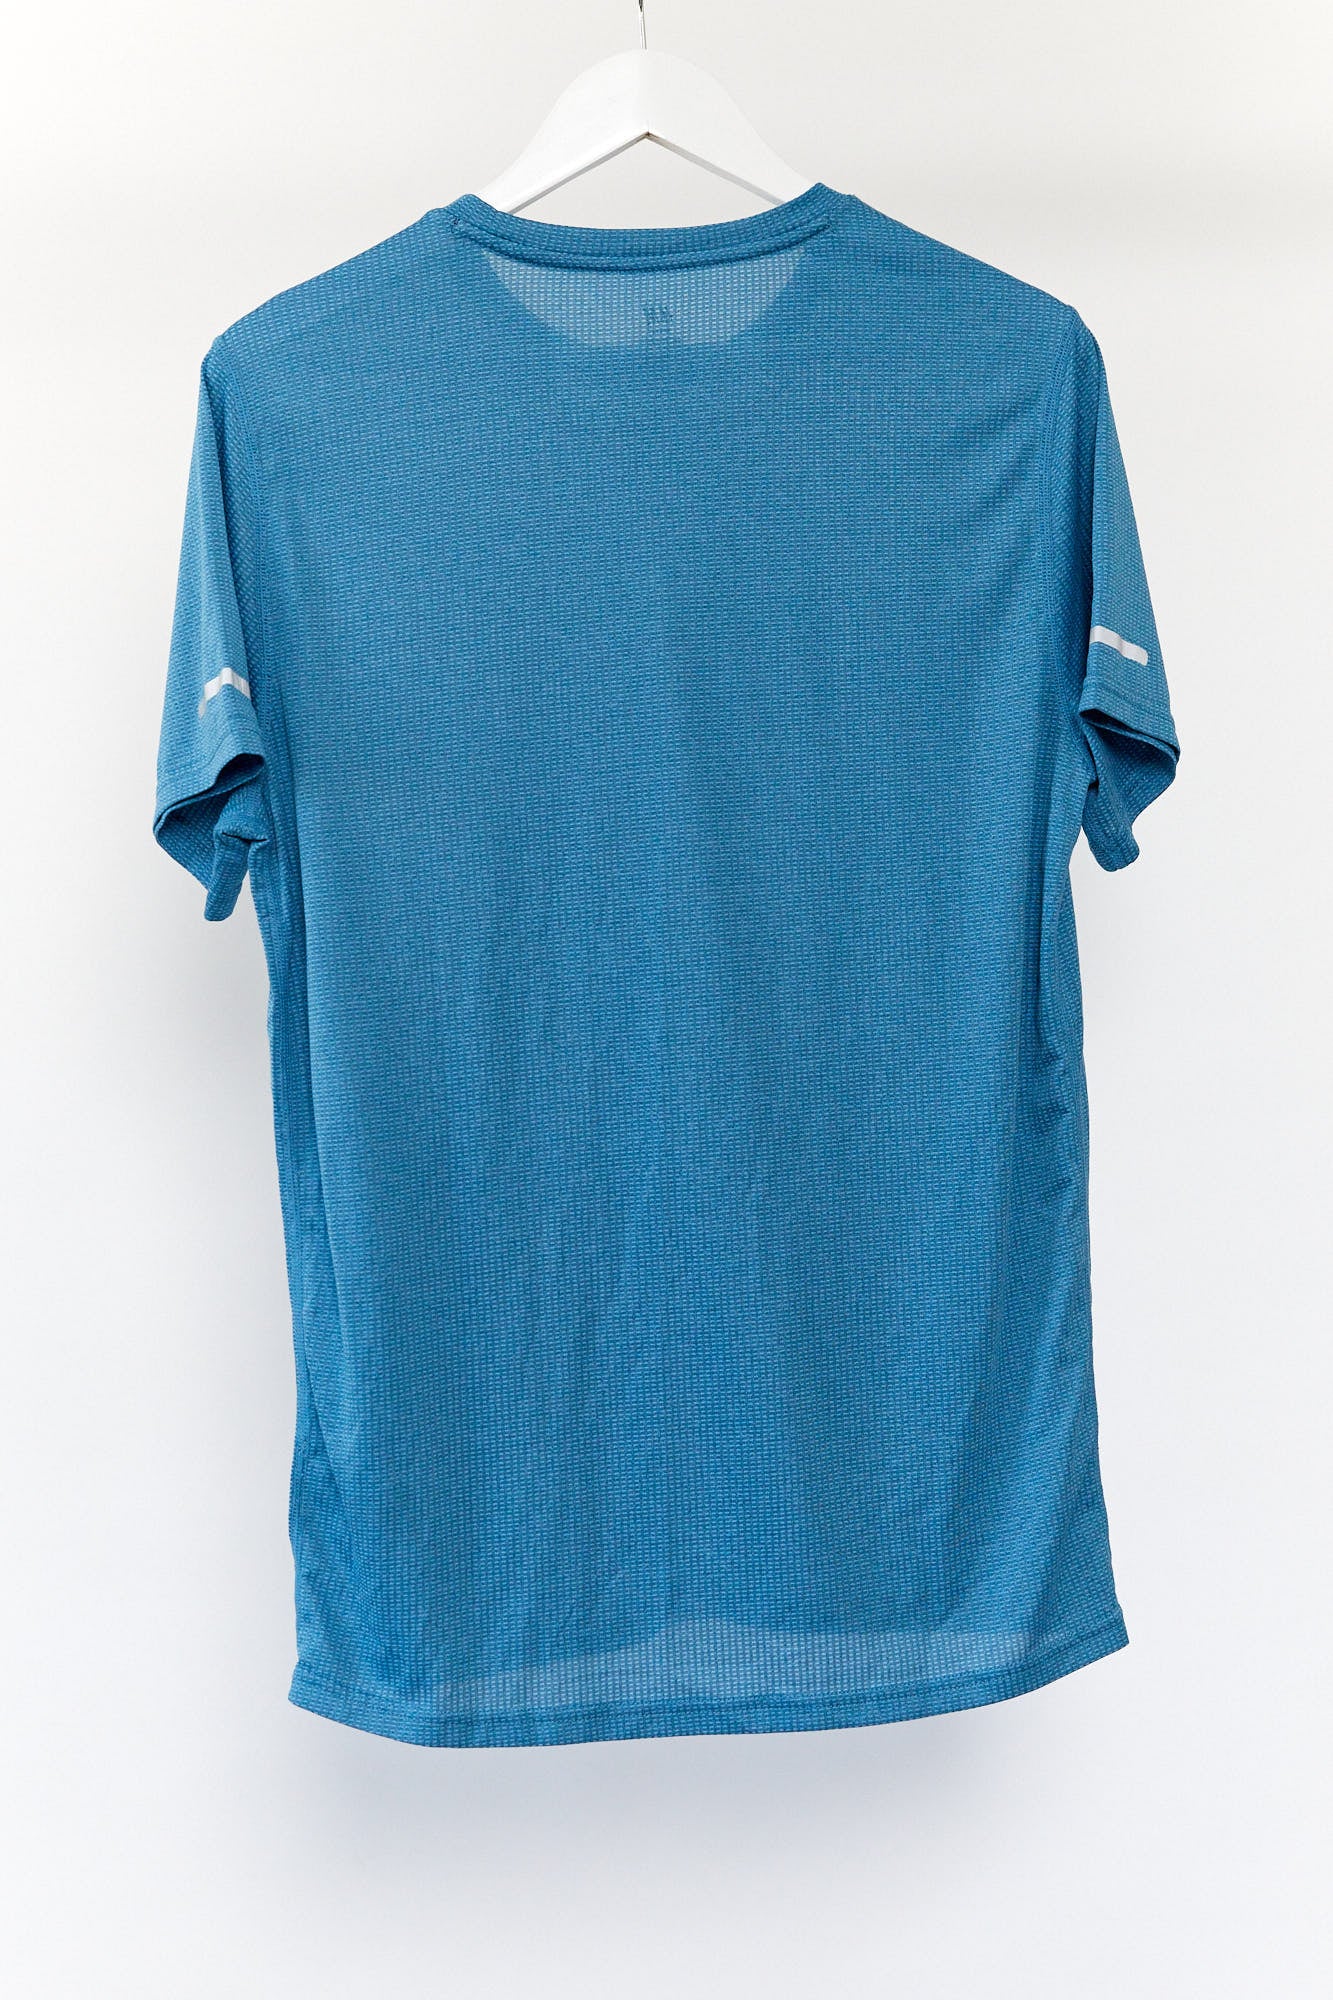 Mens Blue H&M Sport Top Size Small